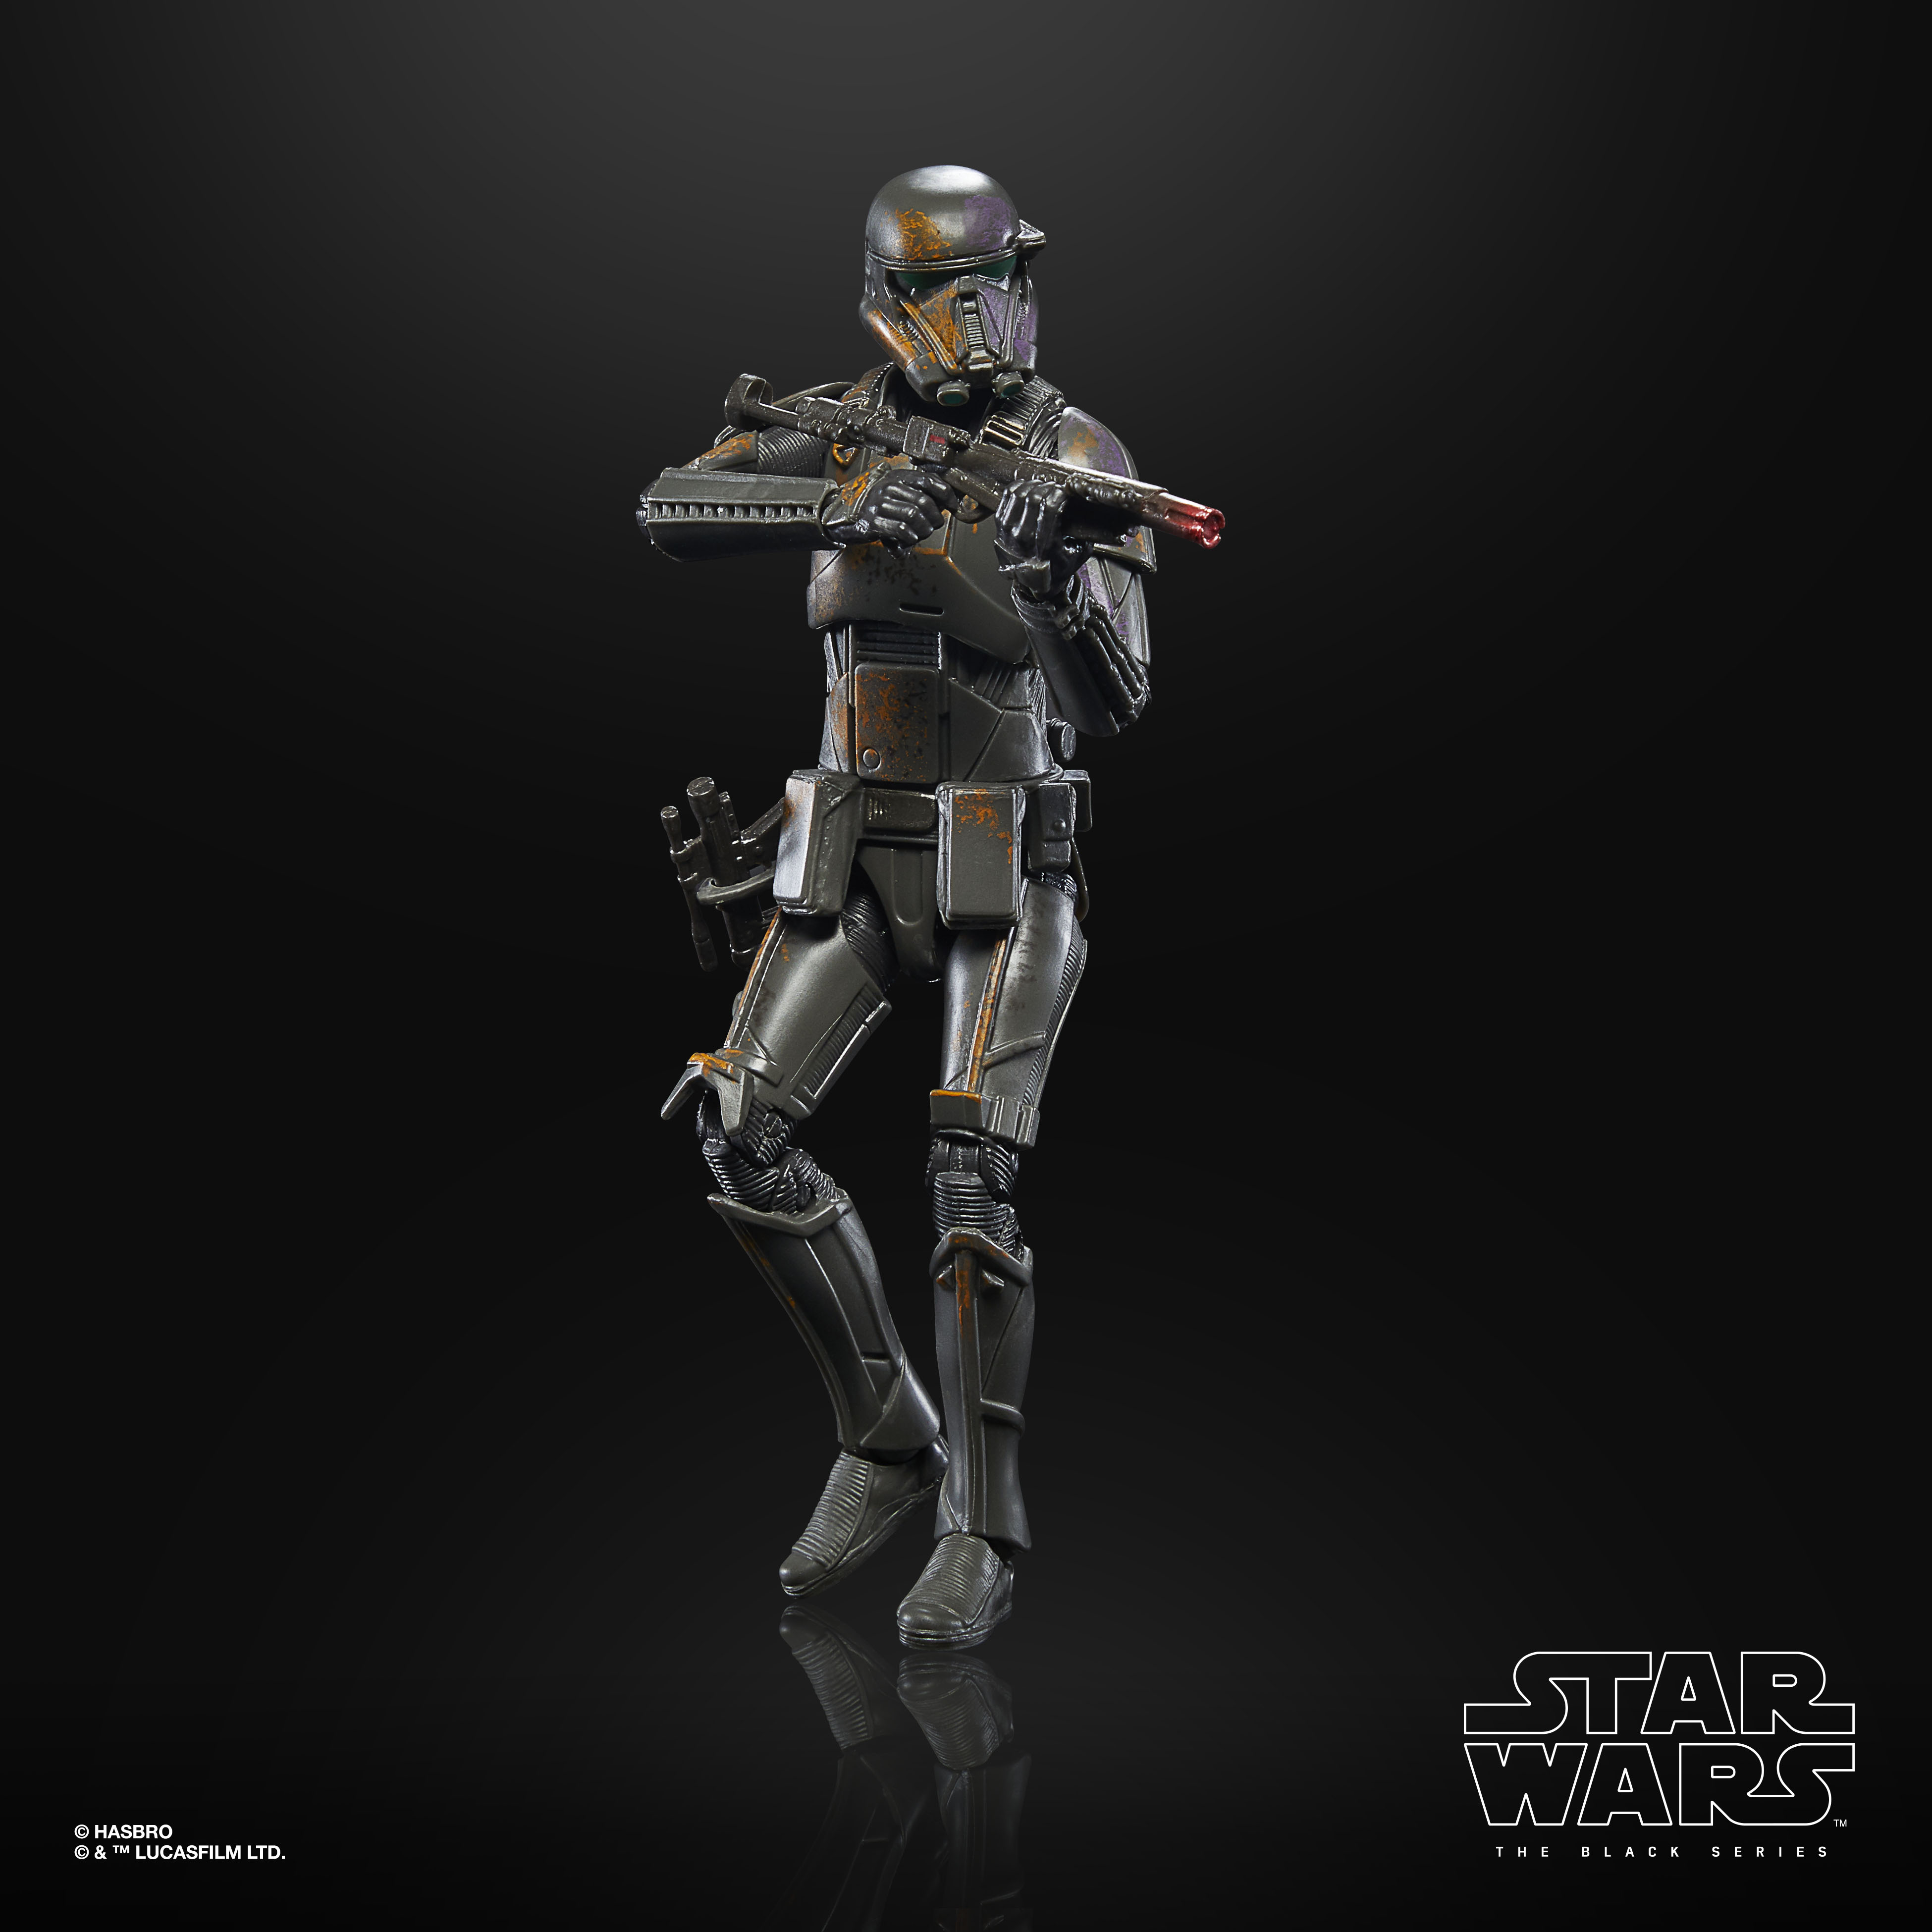 Credit Collection Death Trooper